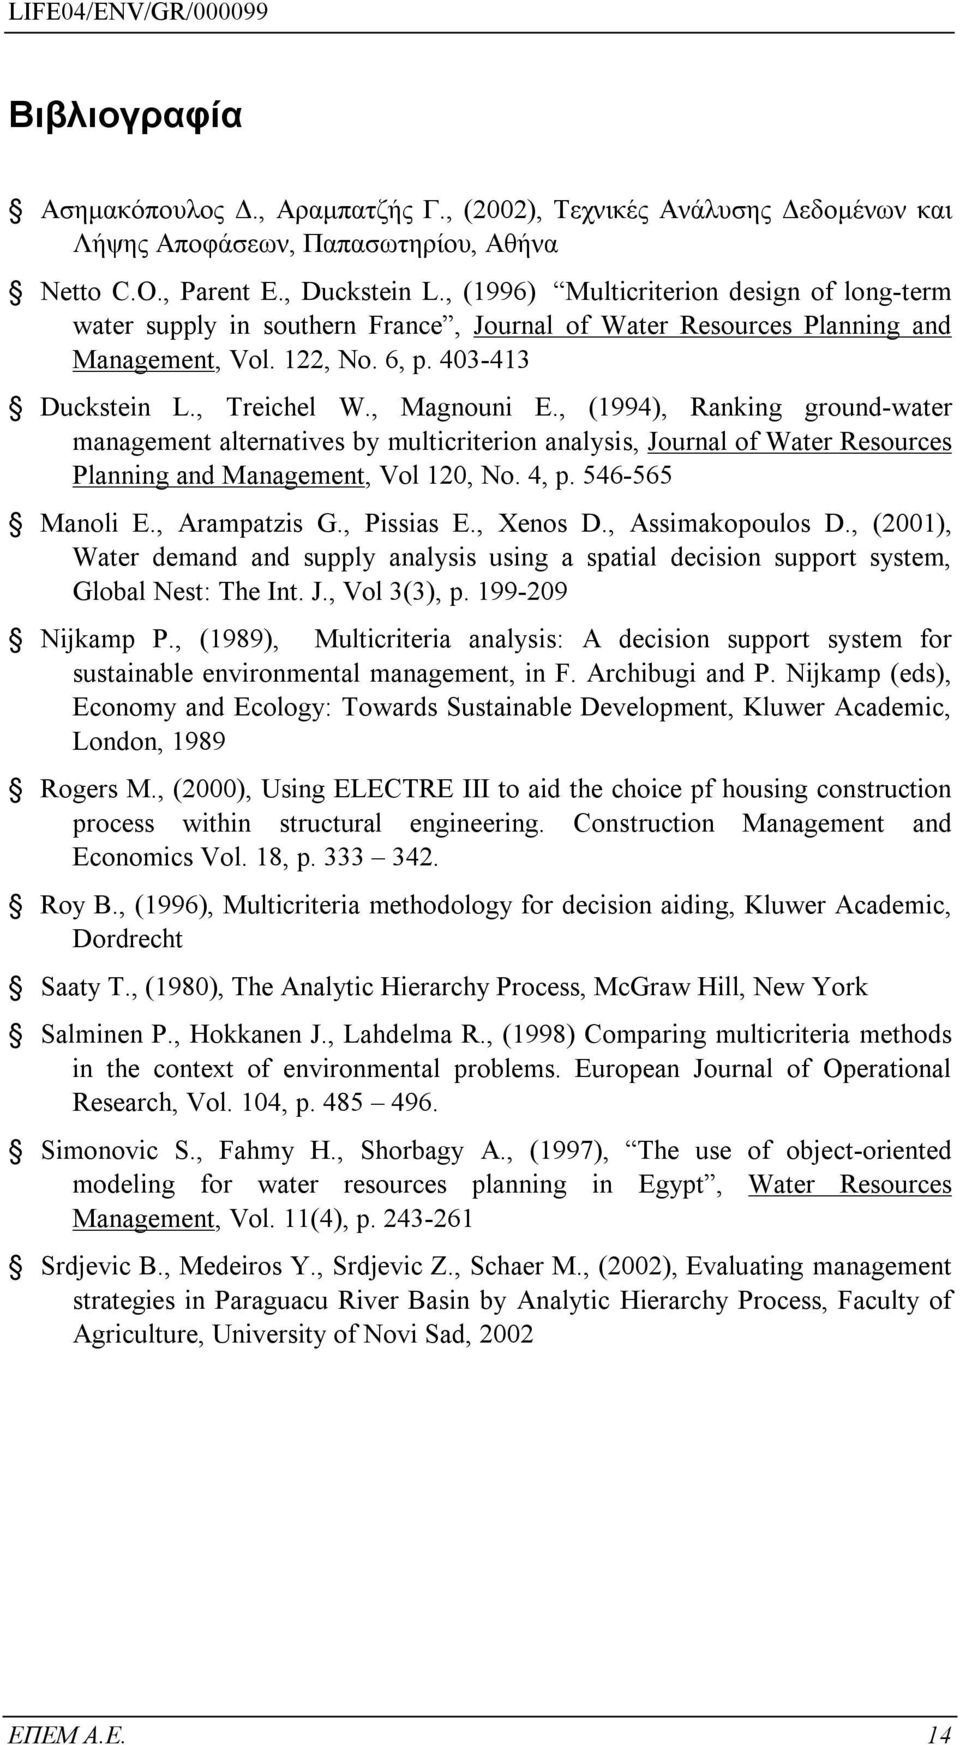 , (1994), Ranking ground-water management alternatives by multicriterion analysis, Journal of Water Resources Planning and Management, Vol 120, No. 4, p. 546-565 Manoli E., Arampatzis G., Pissias E.